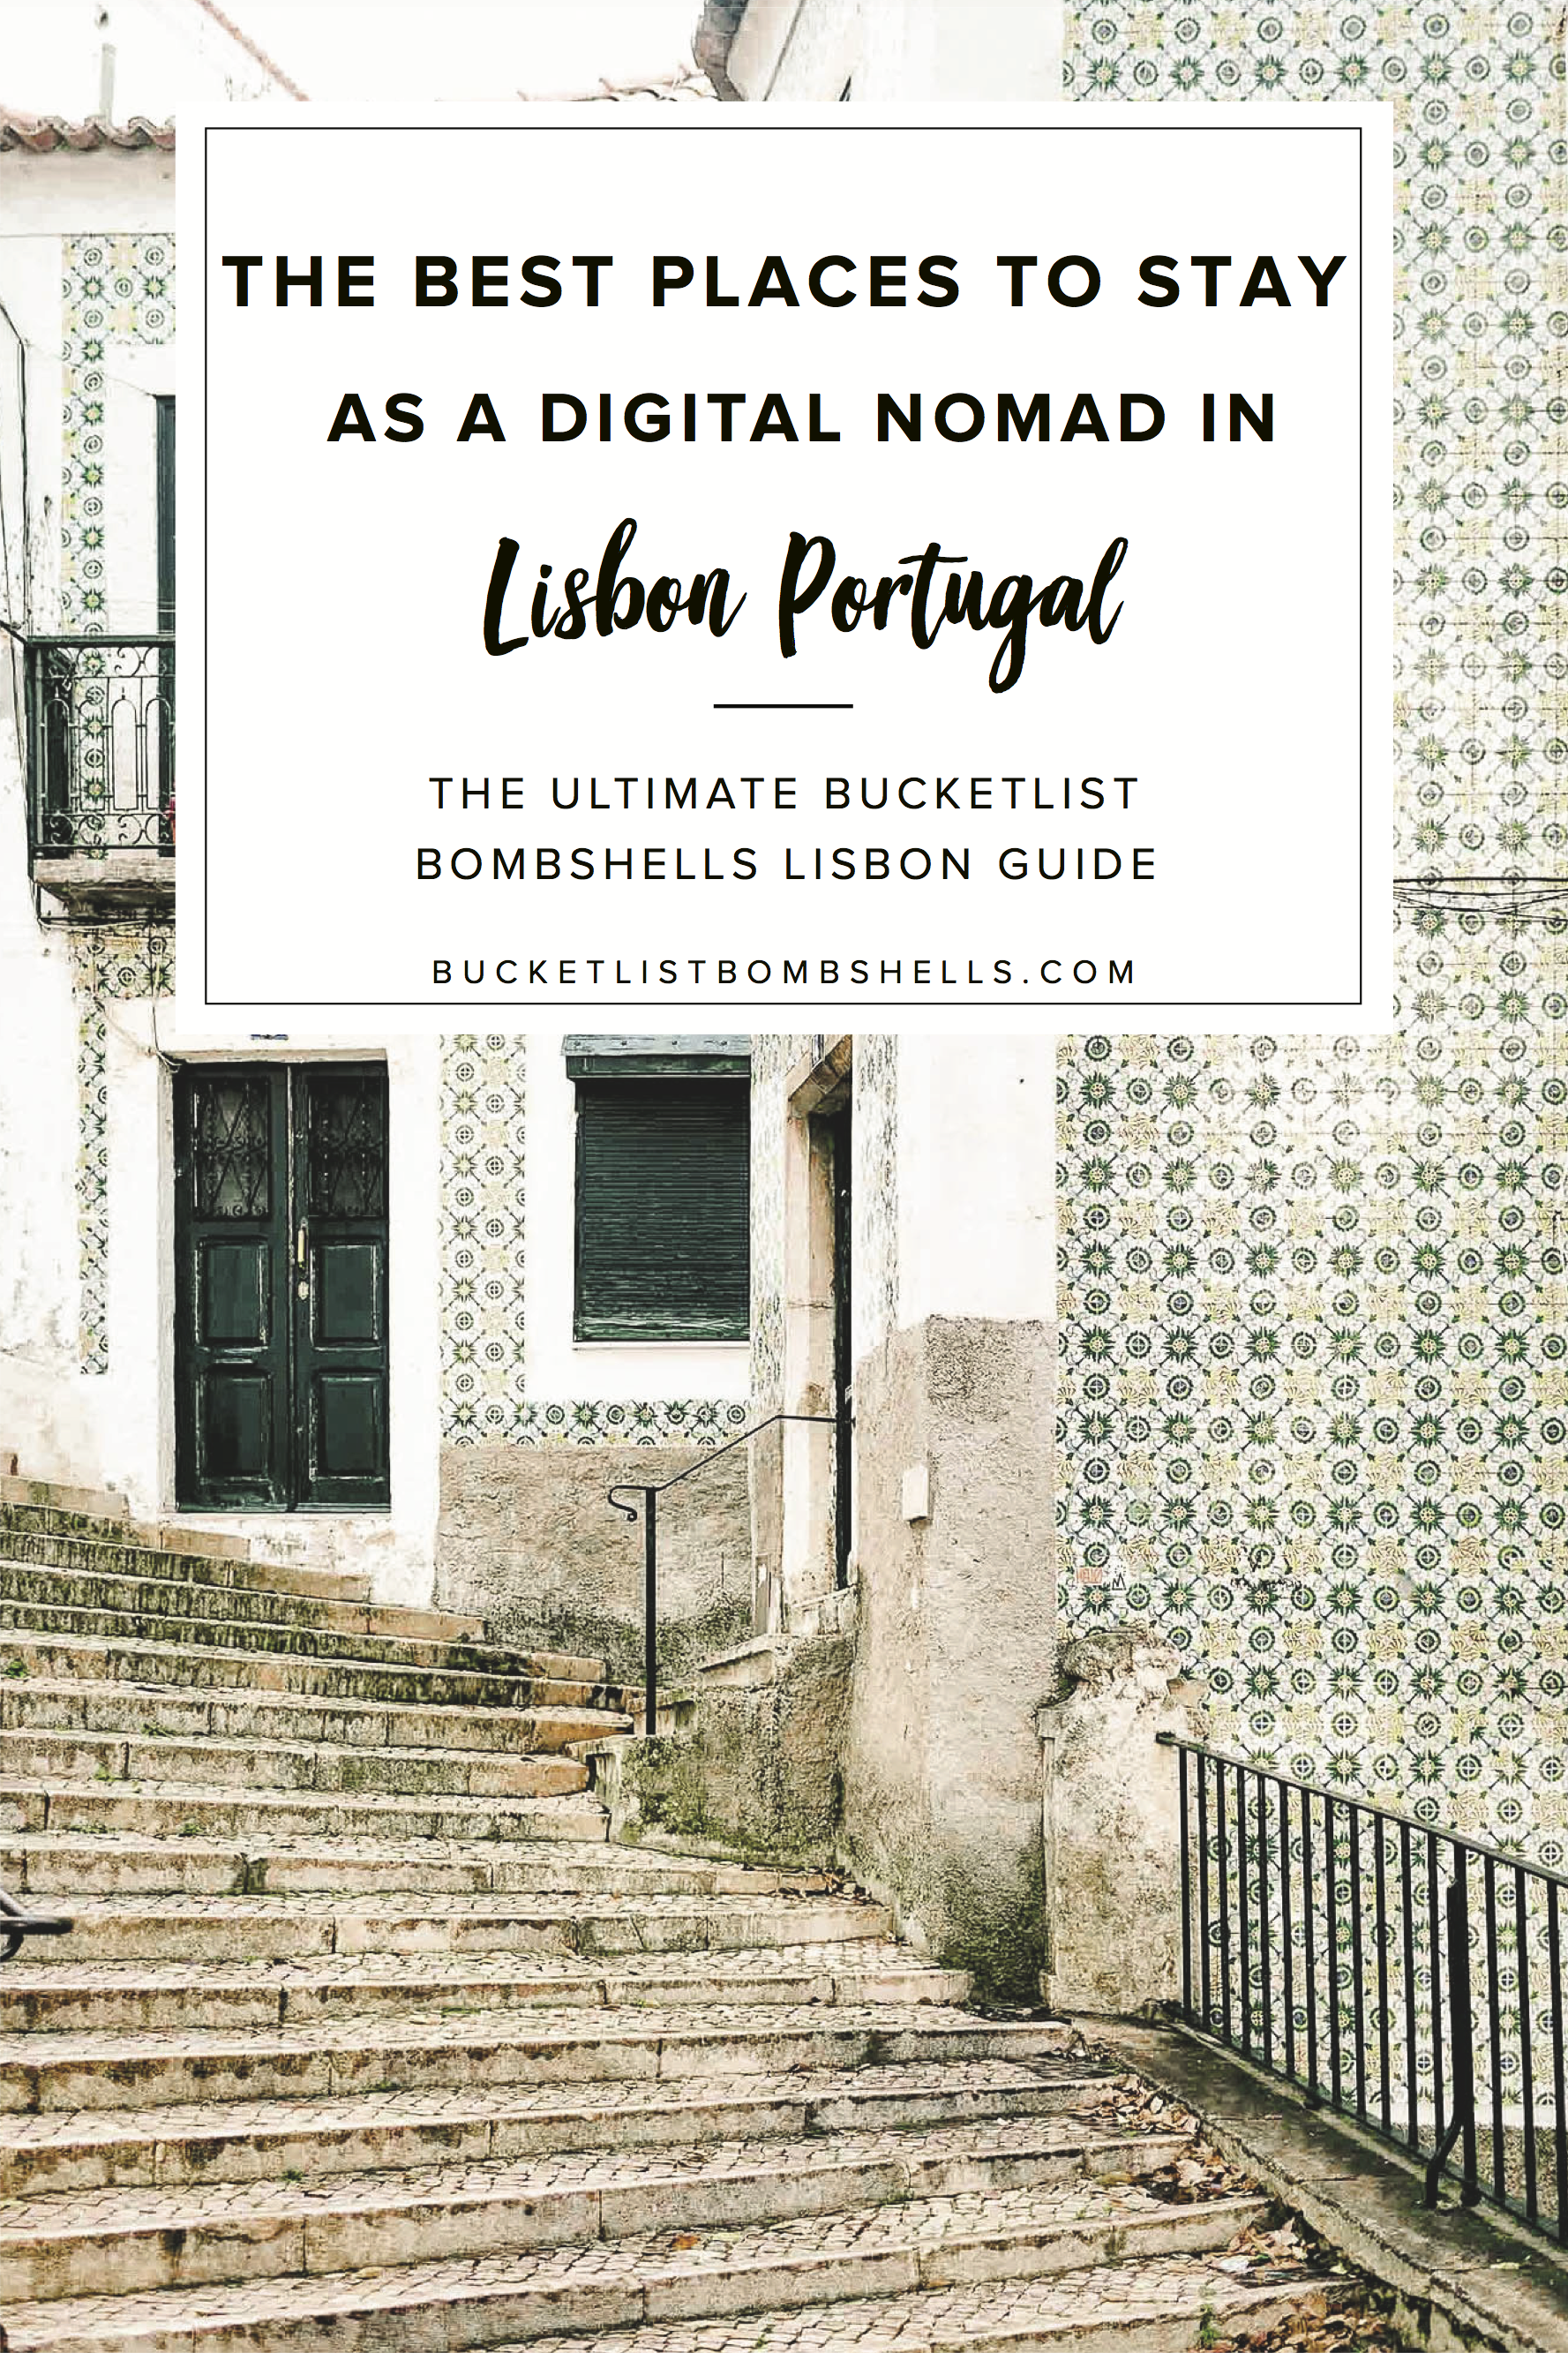 Where to Stay as a Digital Nomad in Lisbon, Portugal